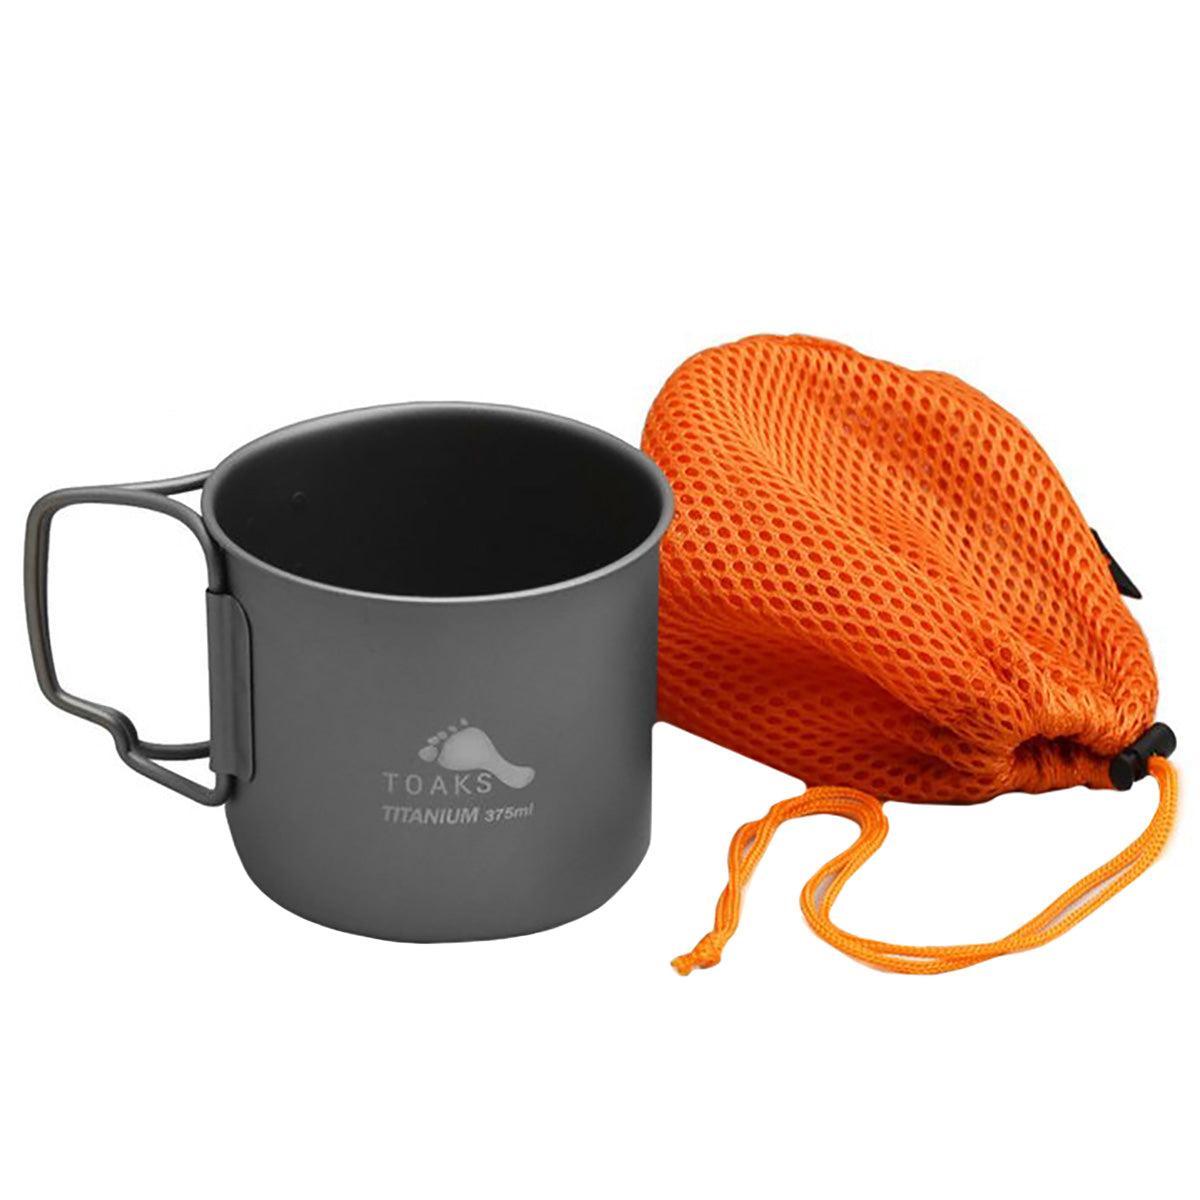 TOAKS 375ml Titanium Camping Cup with Foldable Handles TOAKS